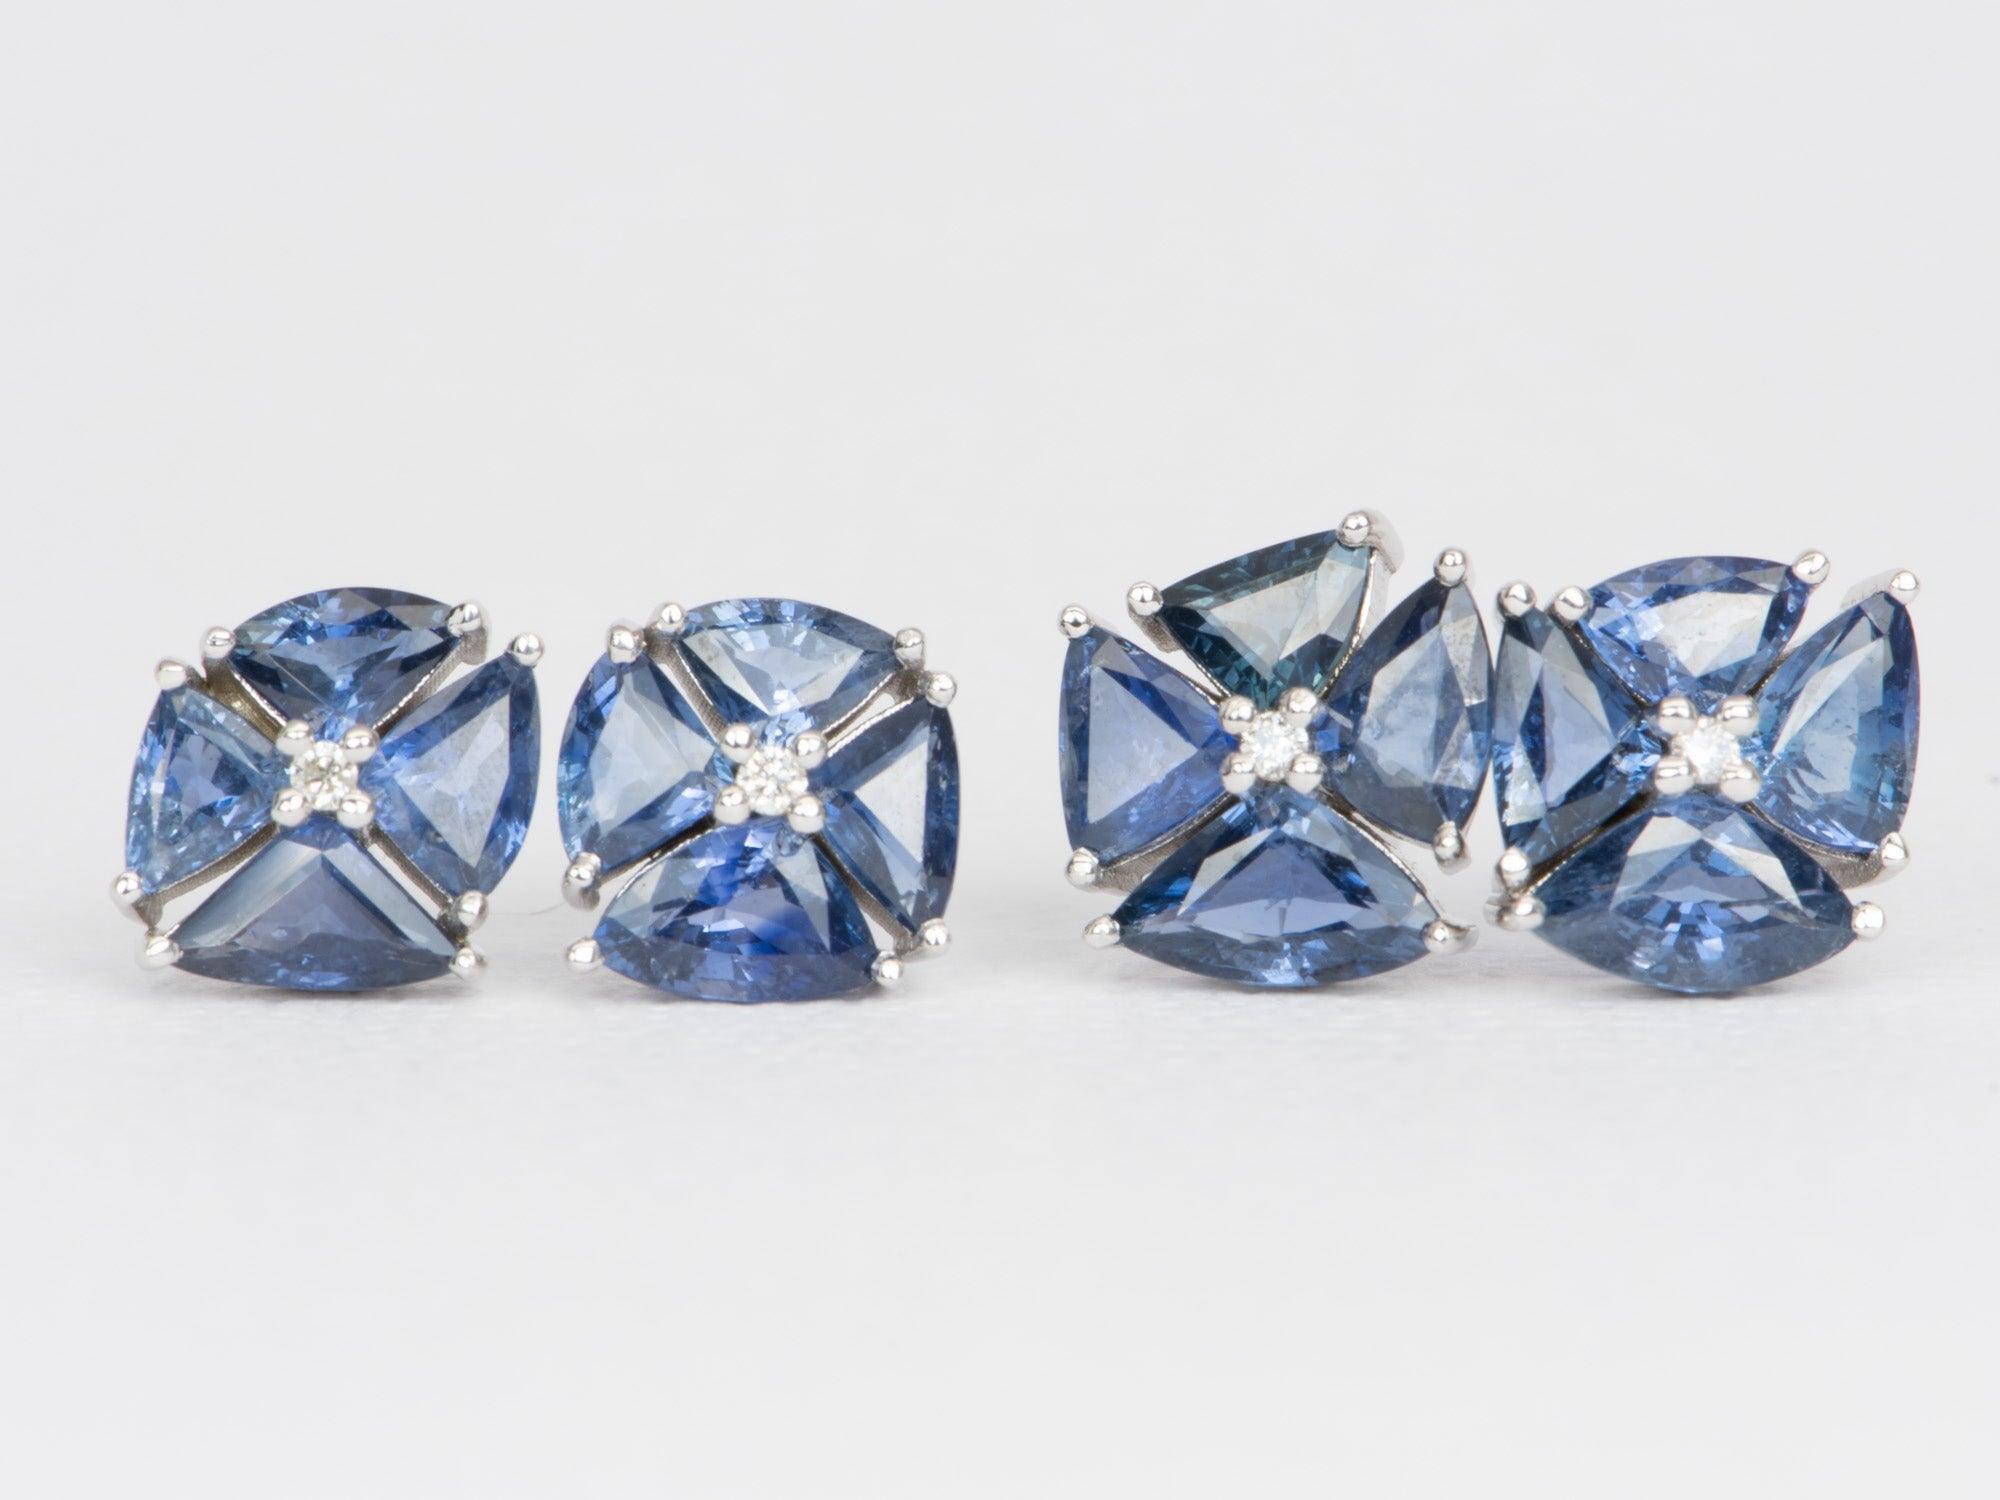 ♥ Solid 14K white gold cluster earrings set with blue sapphires and diamonds

♥ A-The setting measures 8.3 mm in length, 8.3 mm in width, and 4 mm thick
♥ B-The setting measures 10 mm in length, 9.2 mm in width, and 4 mm thick

♥ Material: Solid 14K